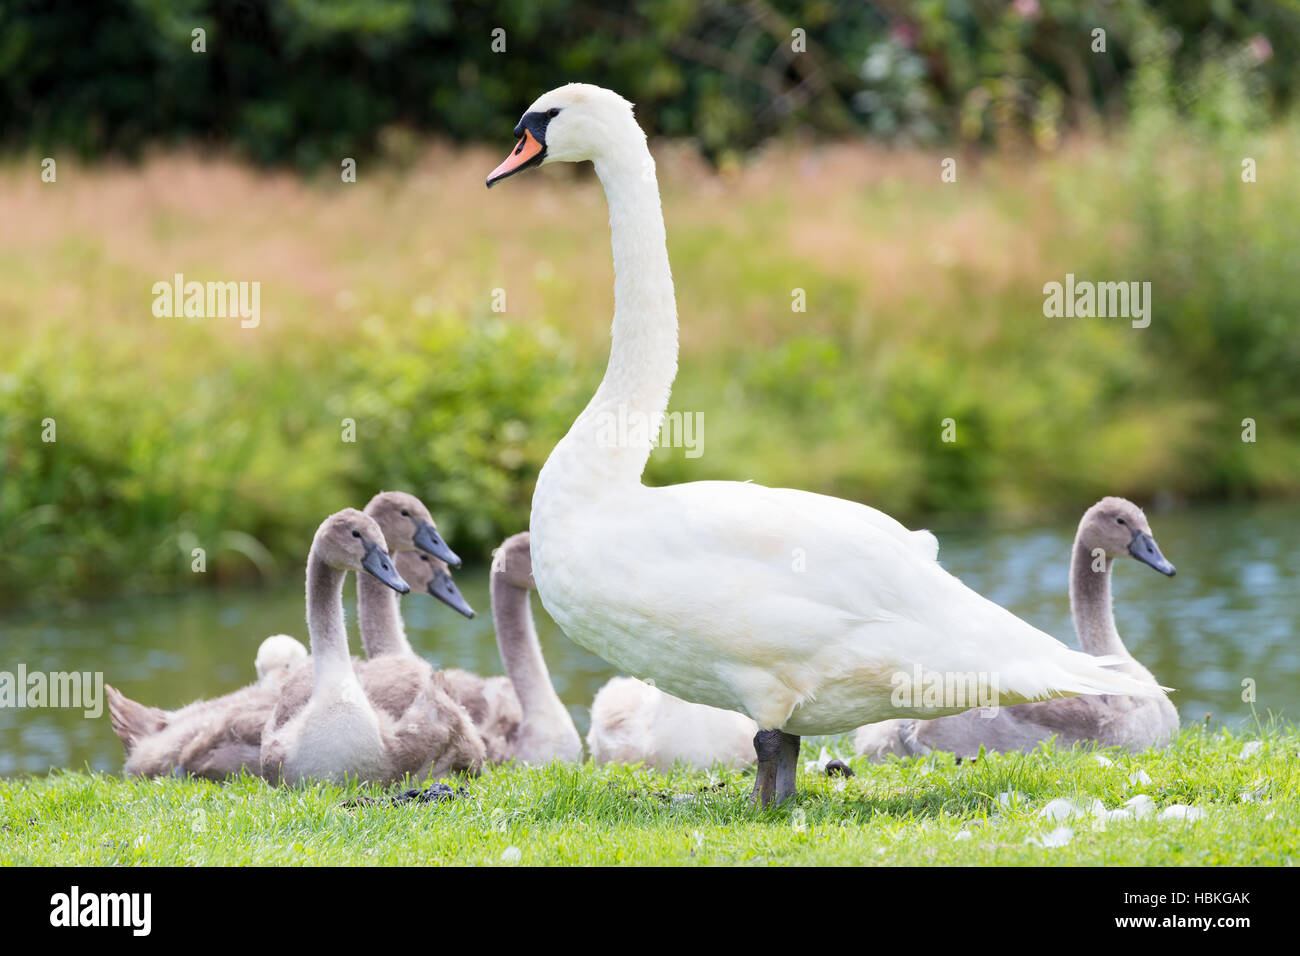 White mother swan with young chicks Stock Photo